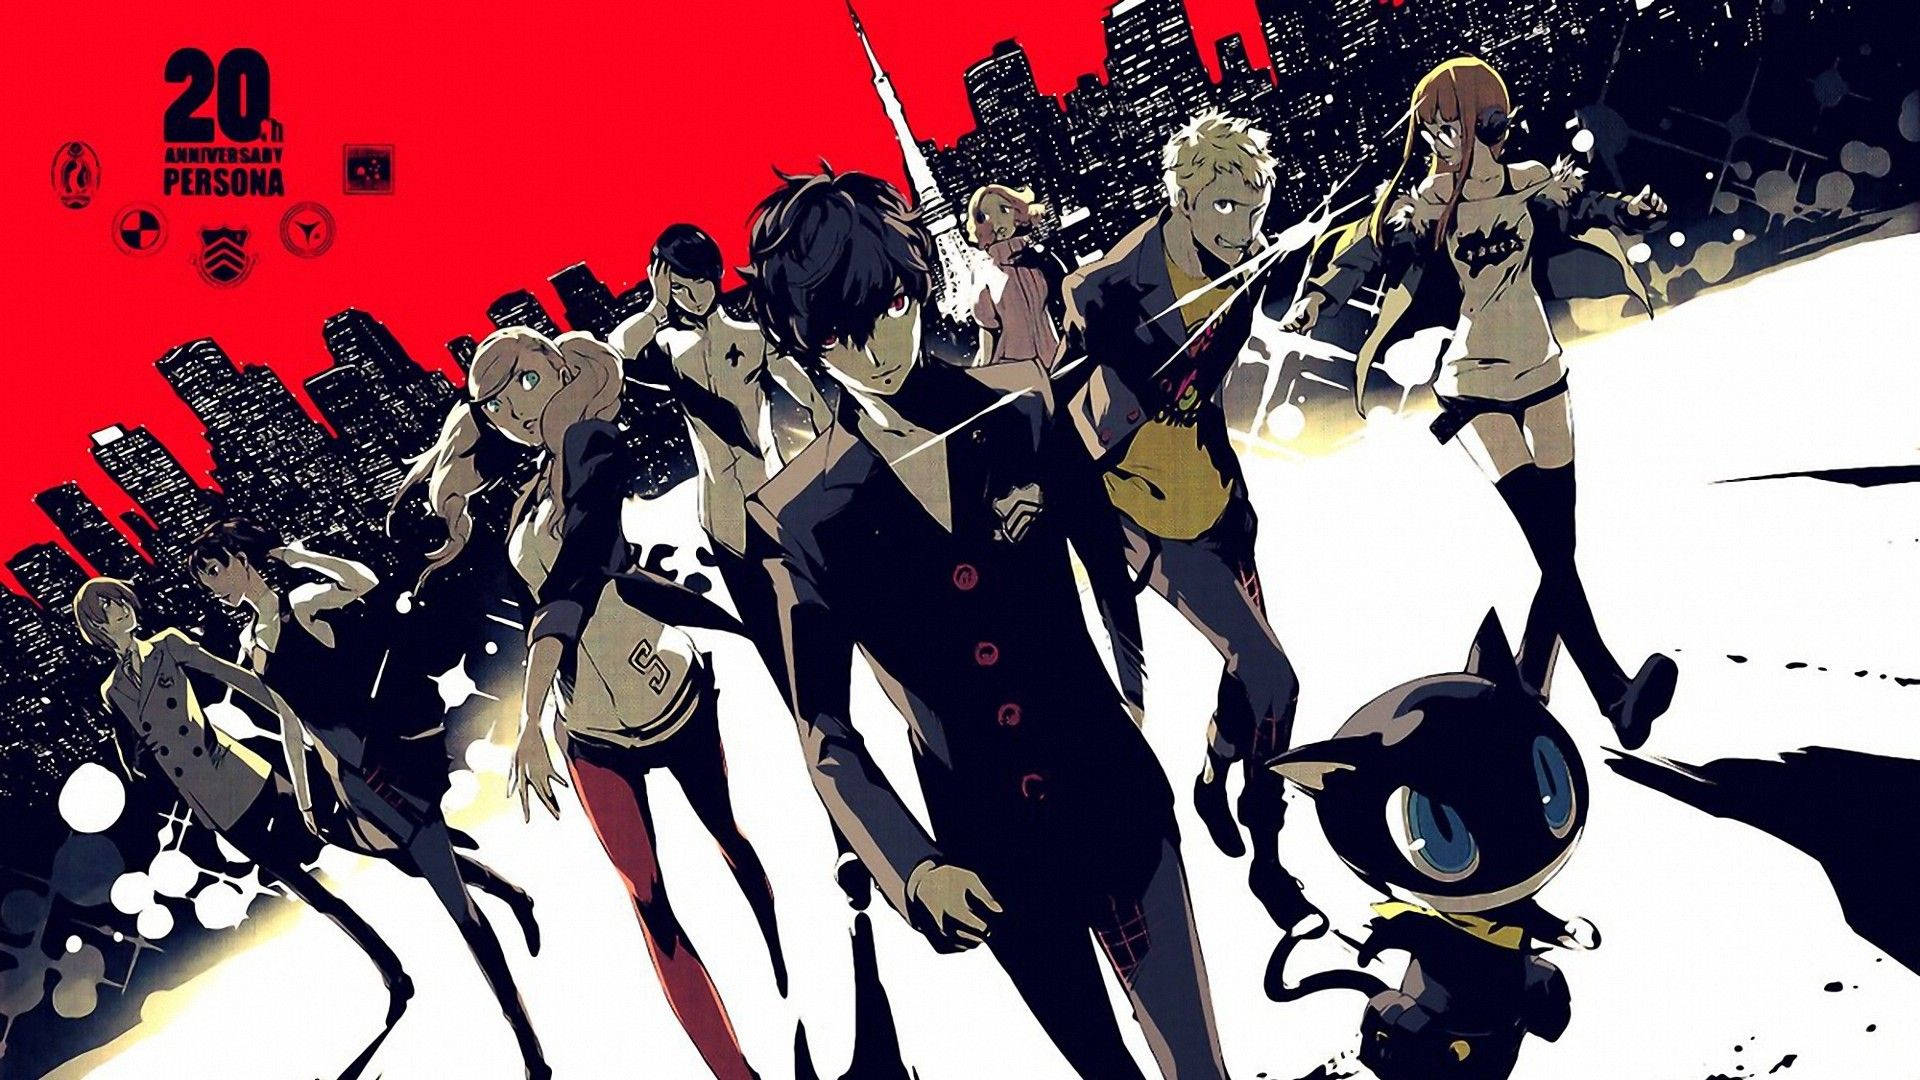 1920X1080 Persona 5 Wallpaper and Background